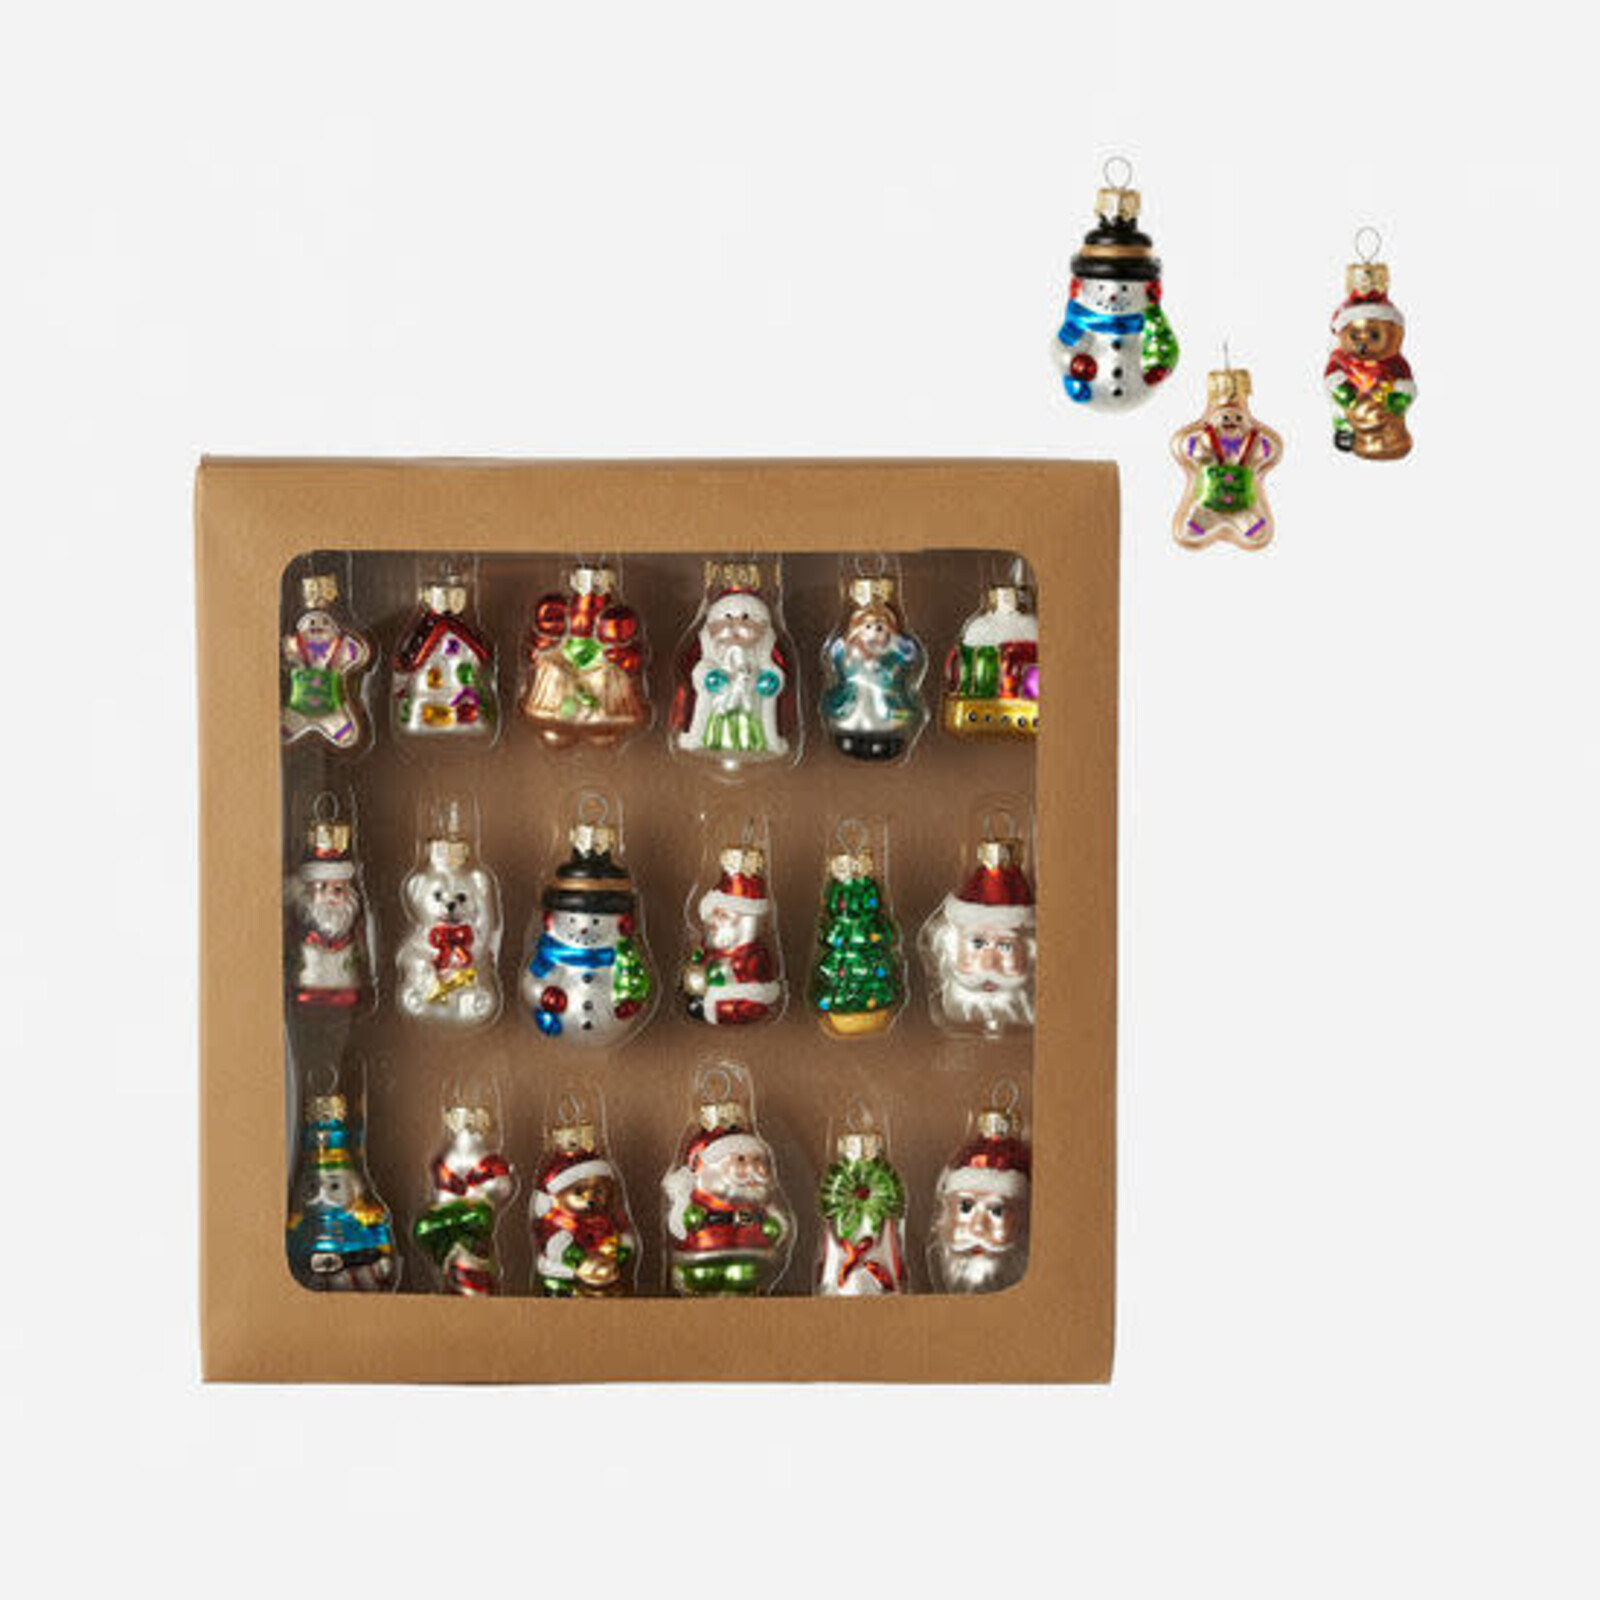 One Hundred 80 Degrees Mini Christmas Ornaments Boxed Set of 18  LH0012 loading=